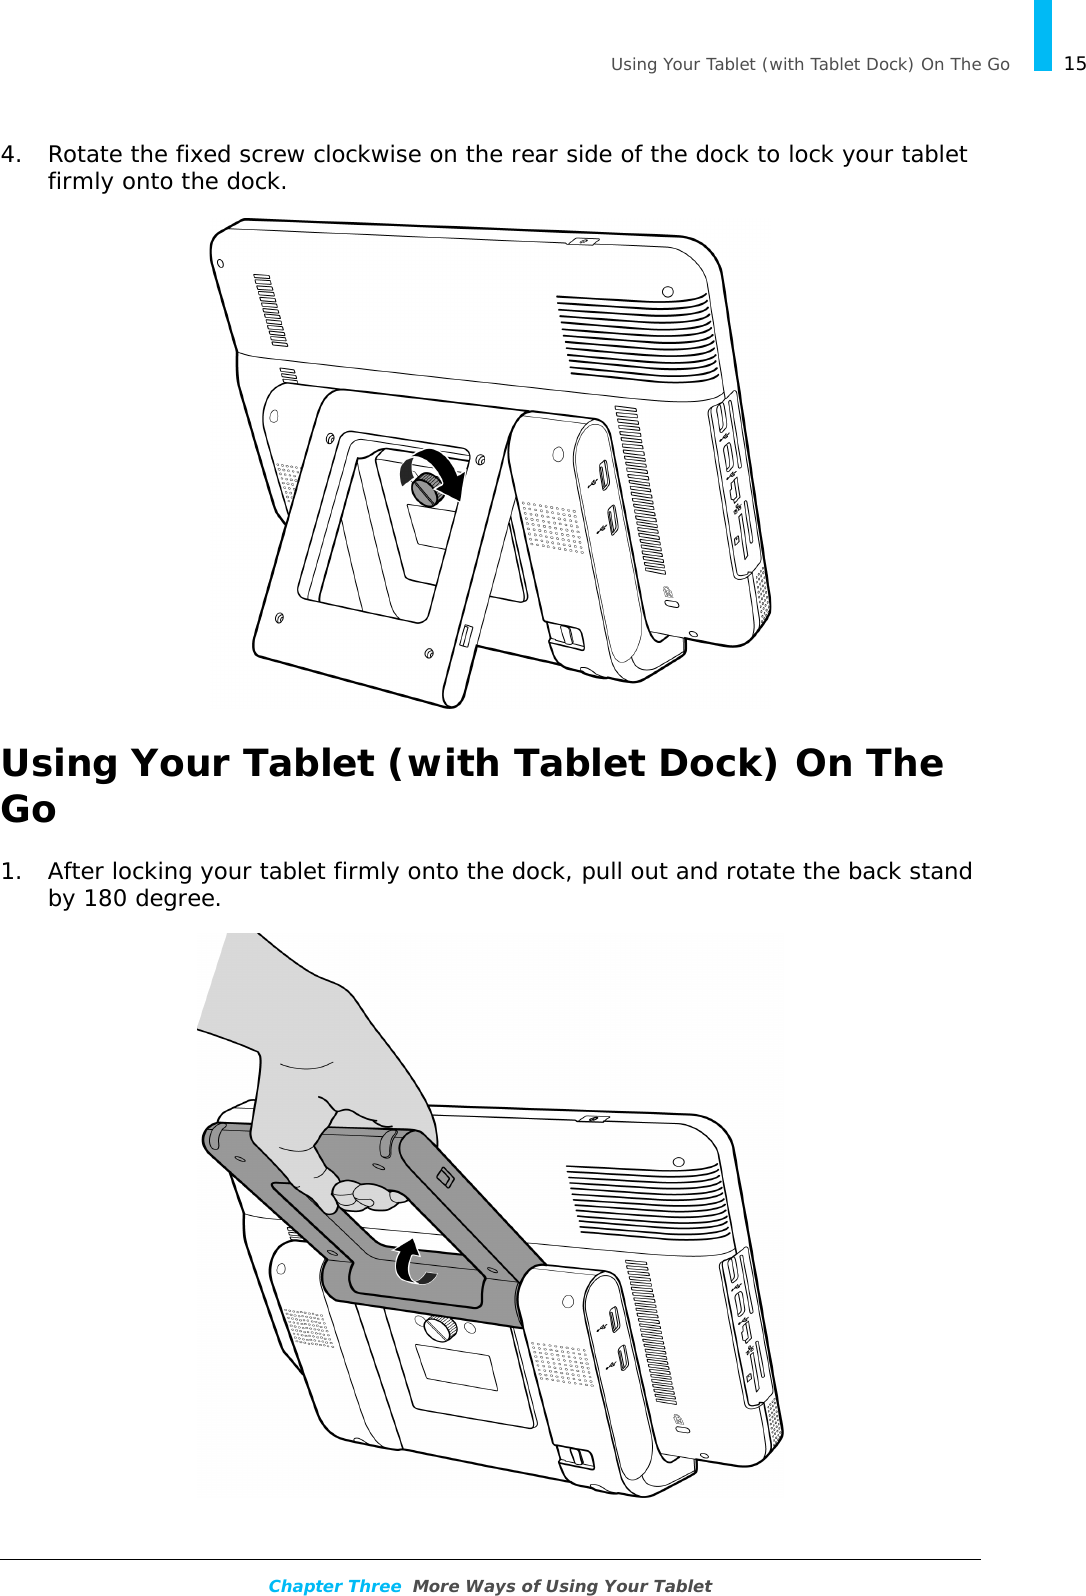   Using Your Tablet (with Tablet Dock) On The Go 15Chapter Three  More Ways of Using Your Tablet4. Rotate the fixed screw clockwise on the rear side of the dock to lock your tablet firmly onto the dock.Using Your Tablet (with Tablet Dock) On The Go1. After locking your tablet firmly onto the dock, pull out and rotate the back stand by 180 degree.